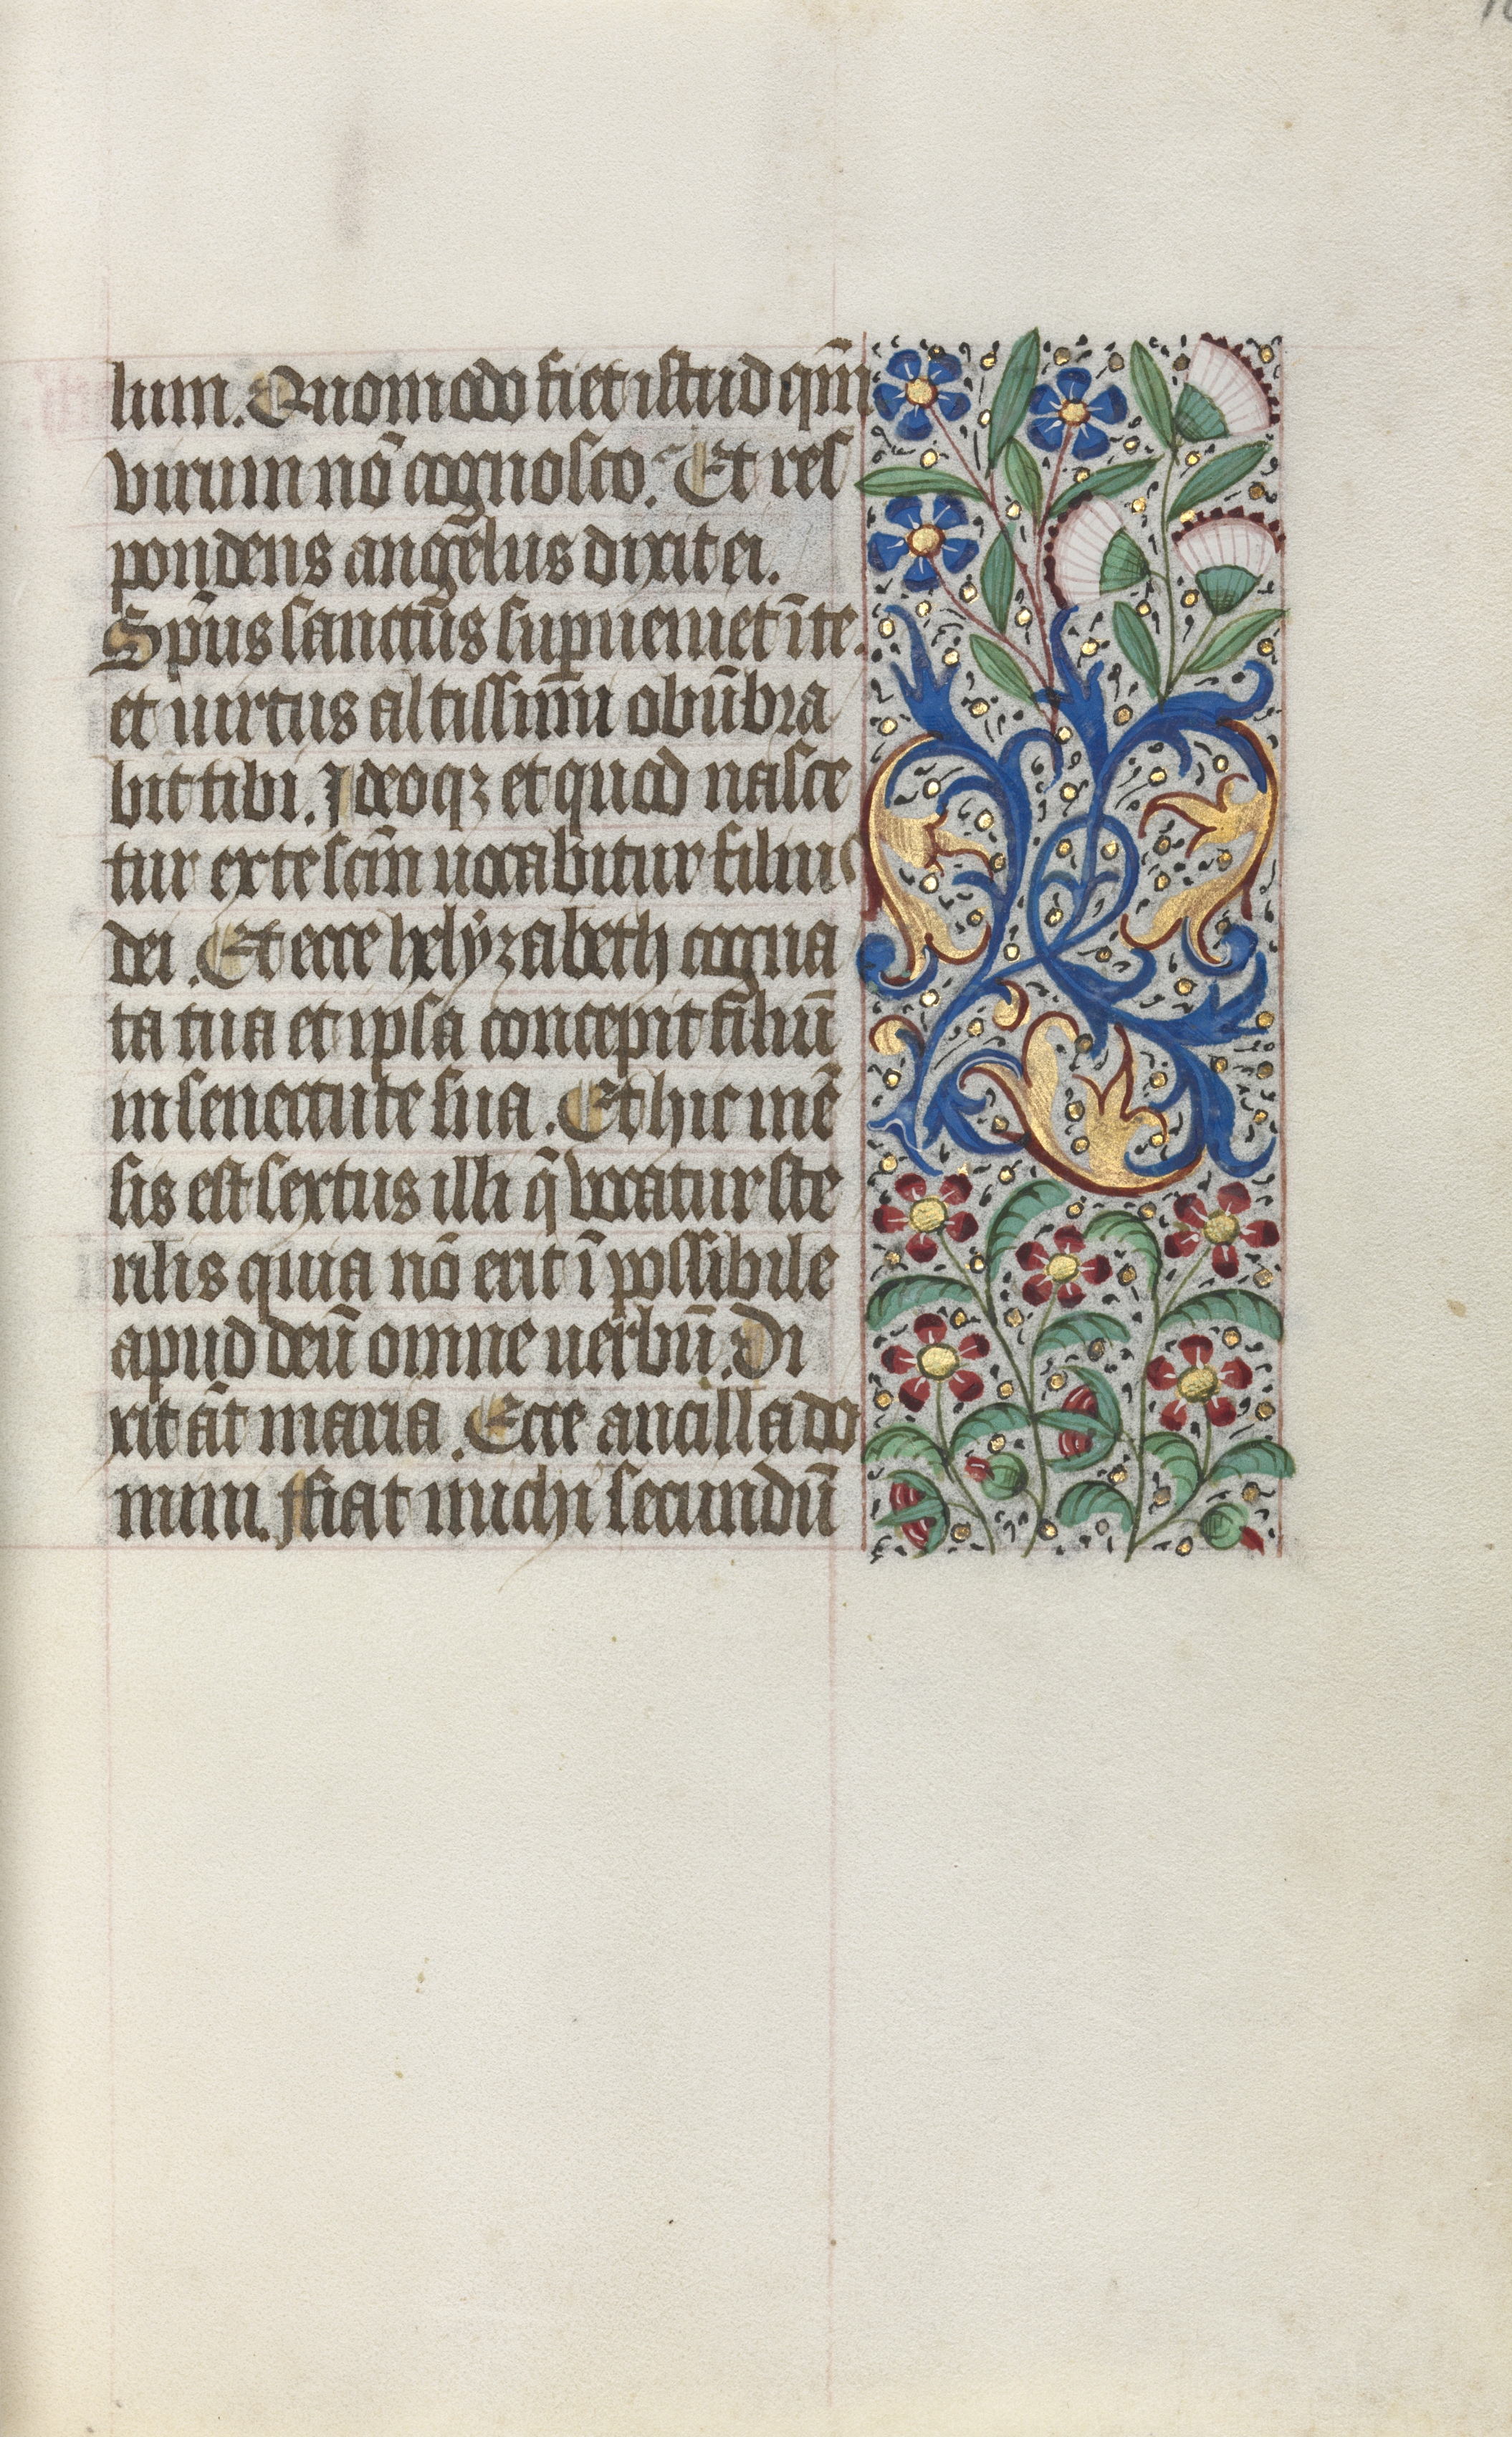 Book of Hours (Use of Rouen): fol. 16r